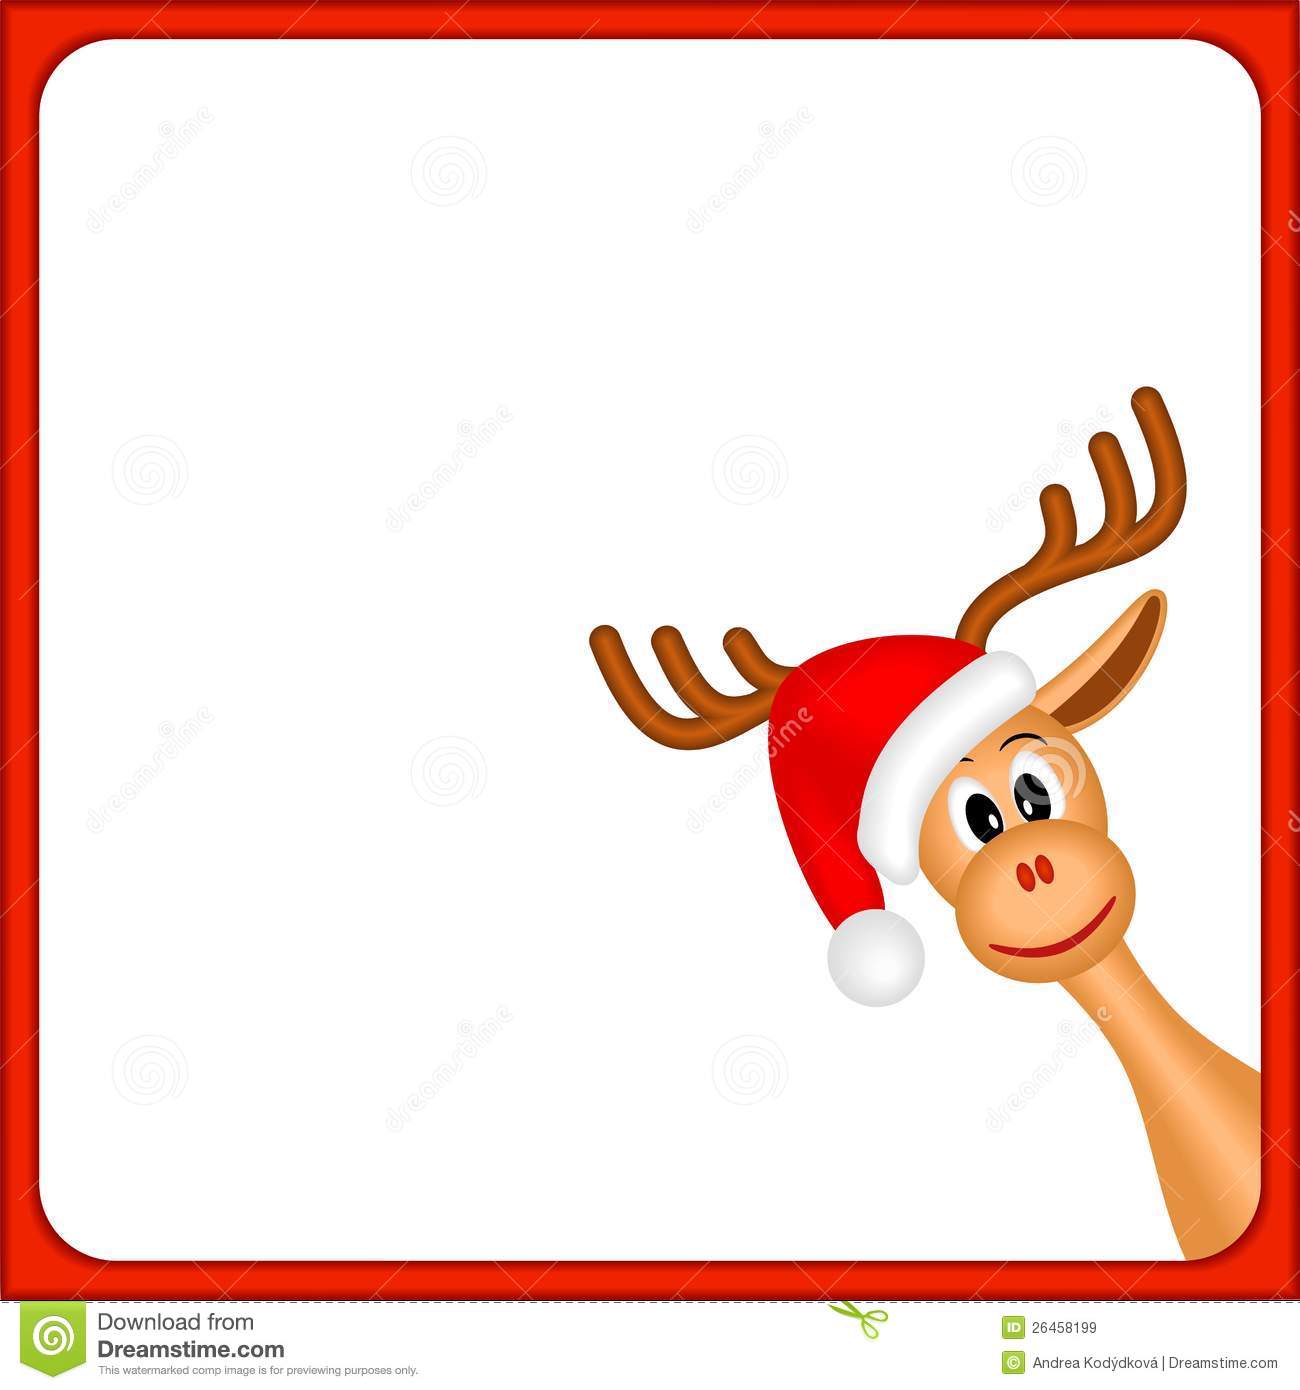 Christmas Reindeer In Empty Frame With Red Border And White Background